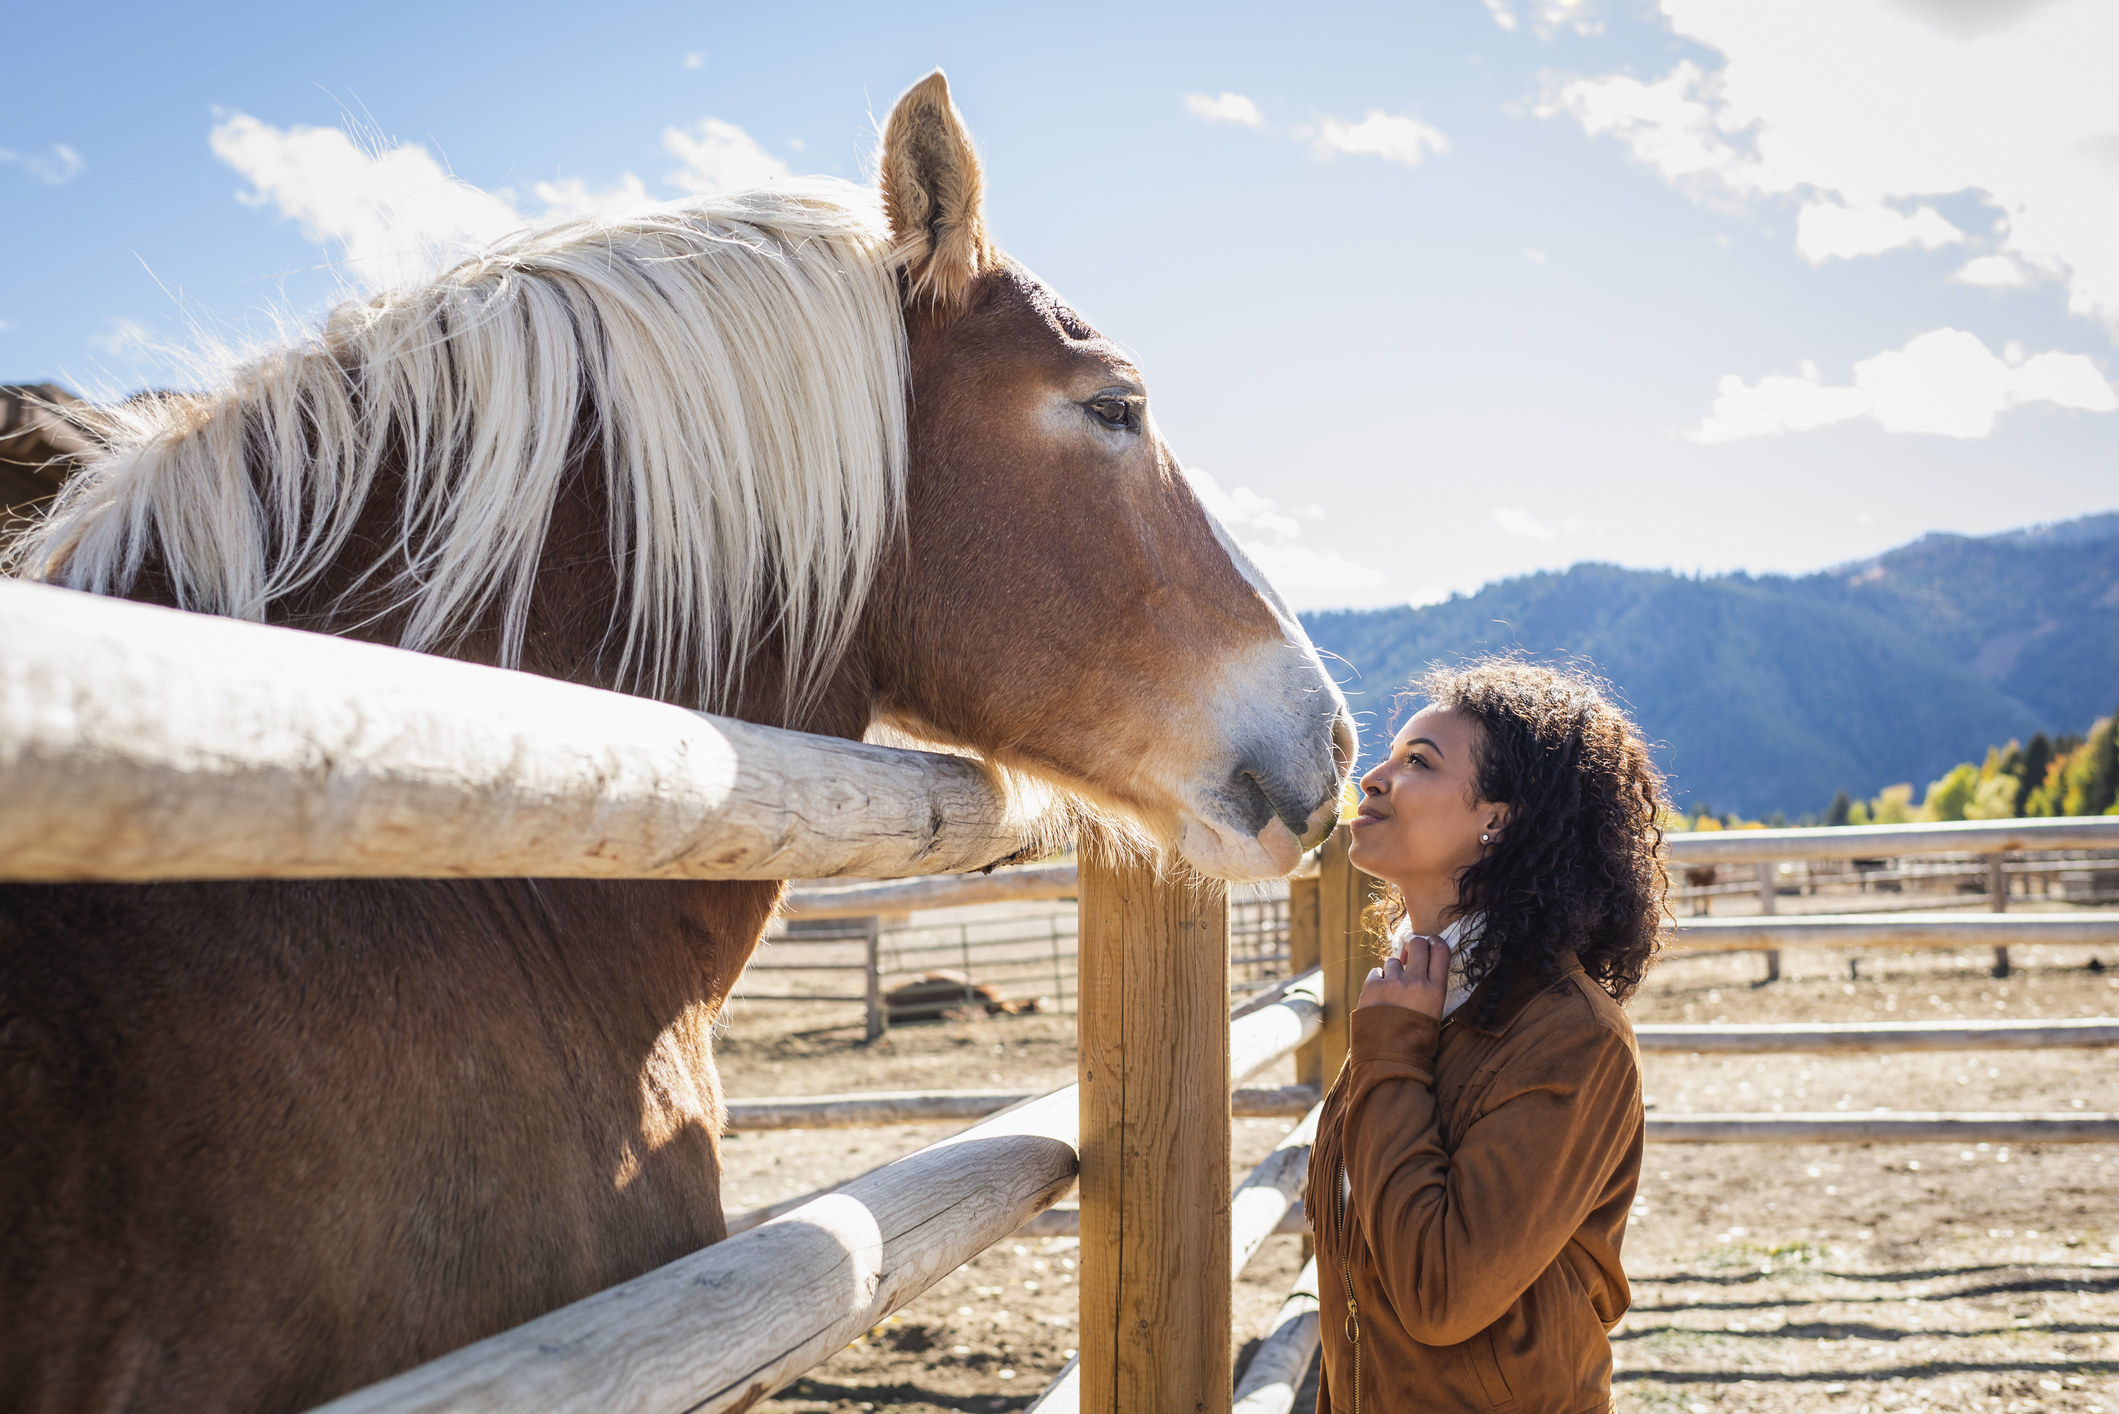 A palomino horse leaning its head over a fence post close to a woman standing on the other side, mountains in the background